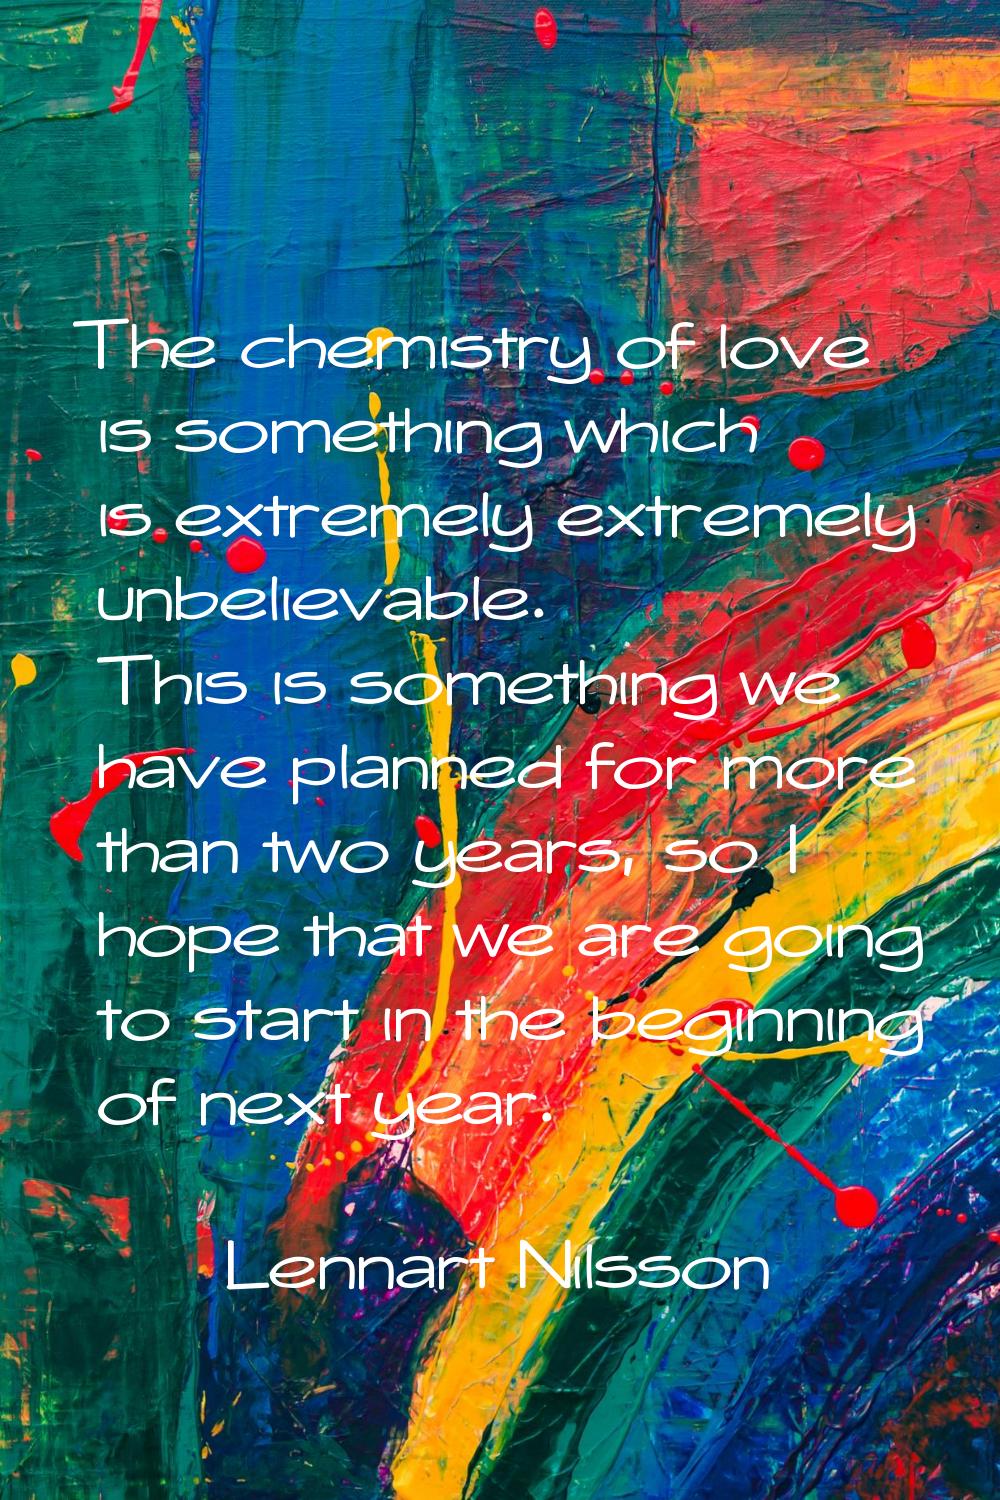 The chemistry of love is something which is extremely extremely unbelievable. This is something we 